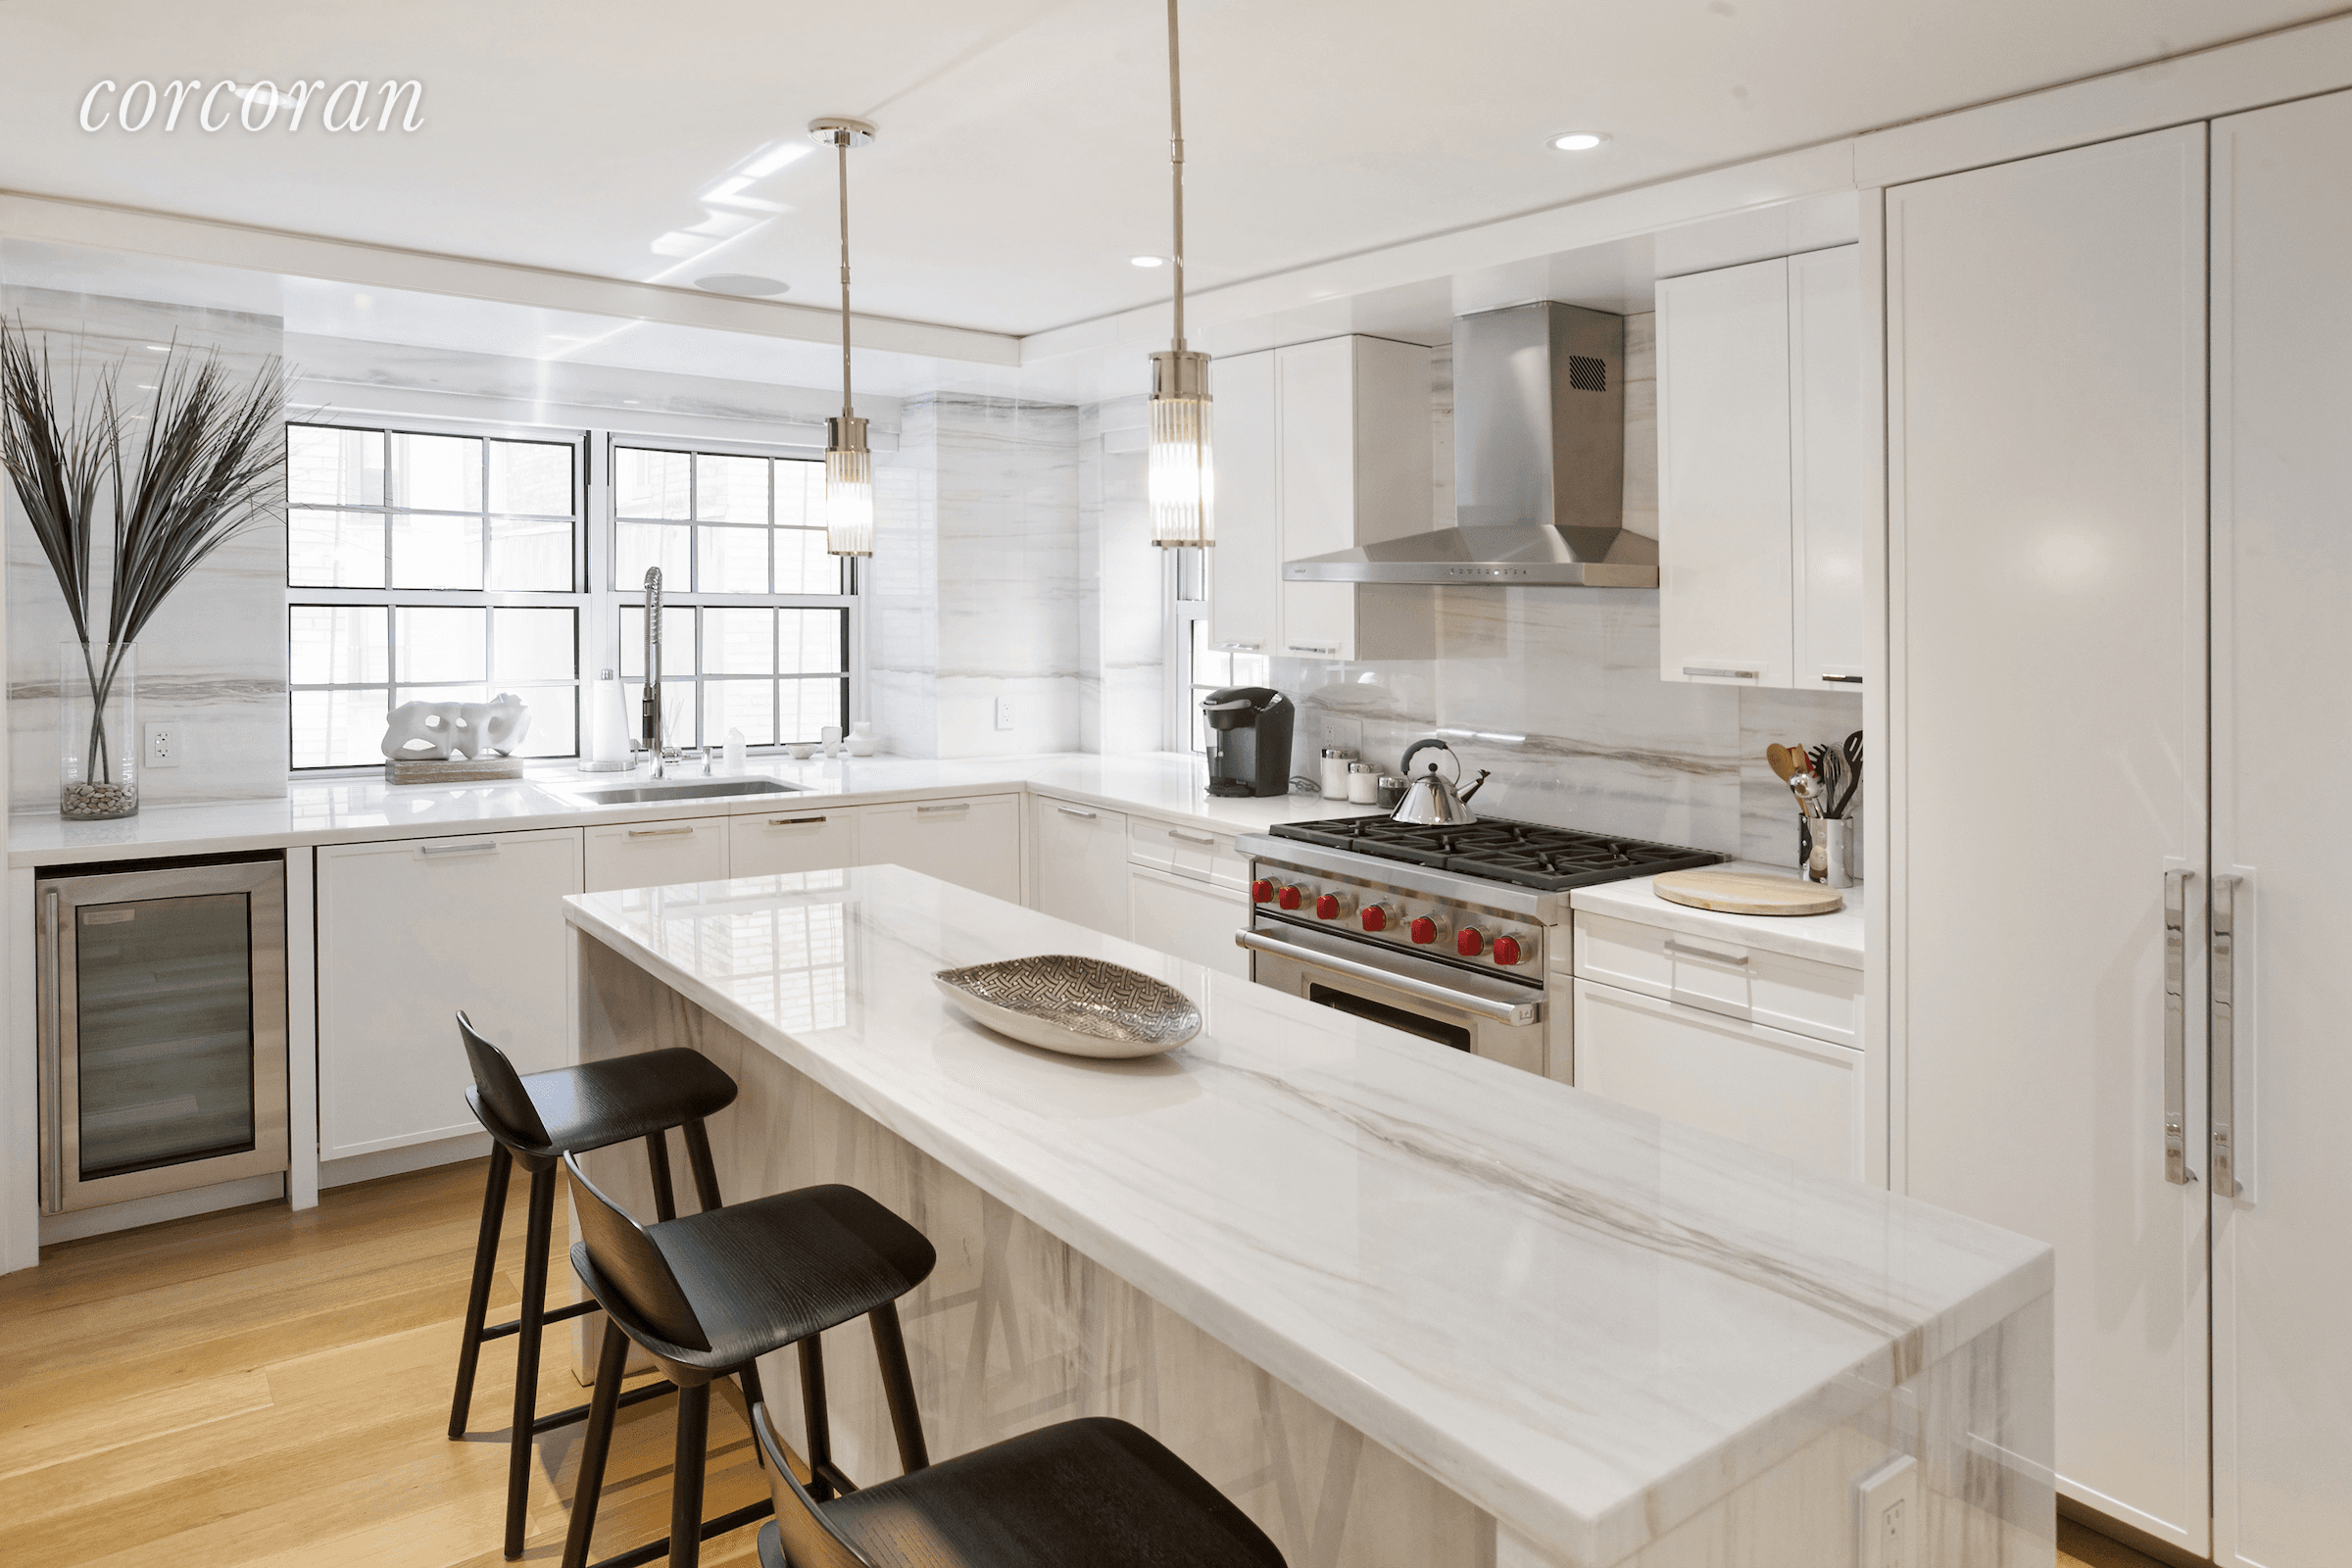 Price Adjustment ! Pre War Candela Condominium on Landmarked East 88th StreetGrandly scaled with stunning pre war detailing, Residence 7A at 12 East 88th Street features four bedrooms and four ...